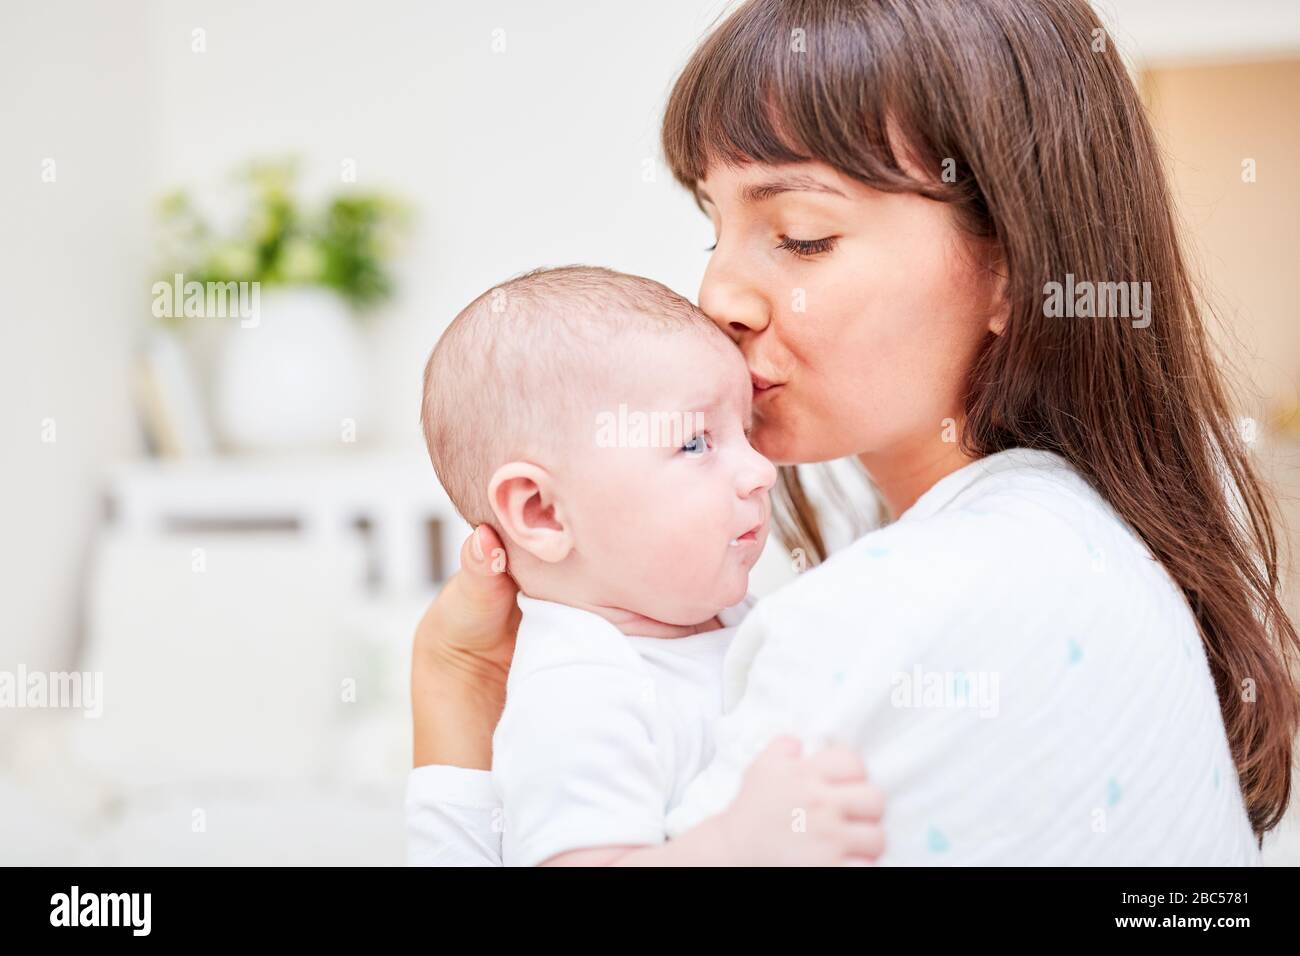 Loving mother gives her baby a kiss on the forehead Stock Photo